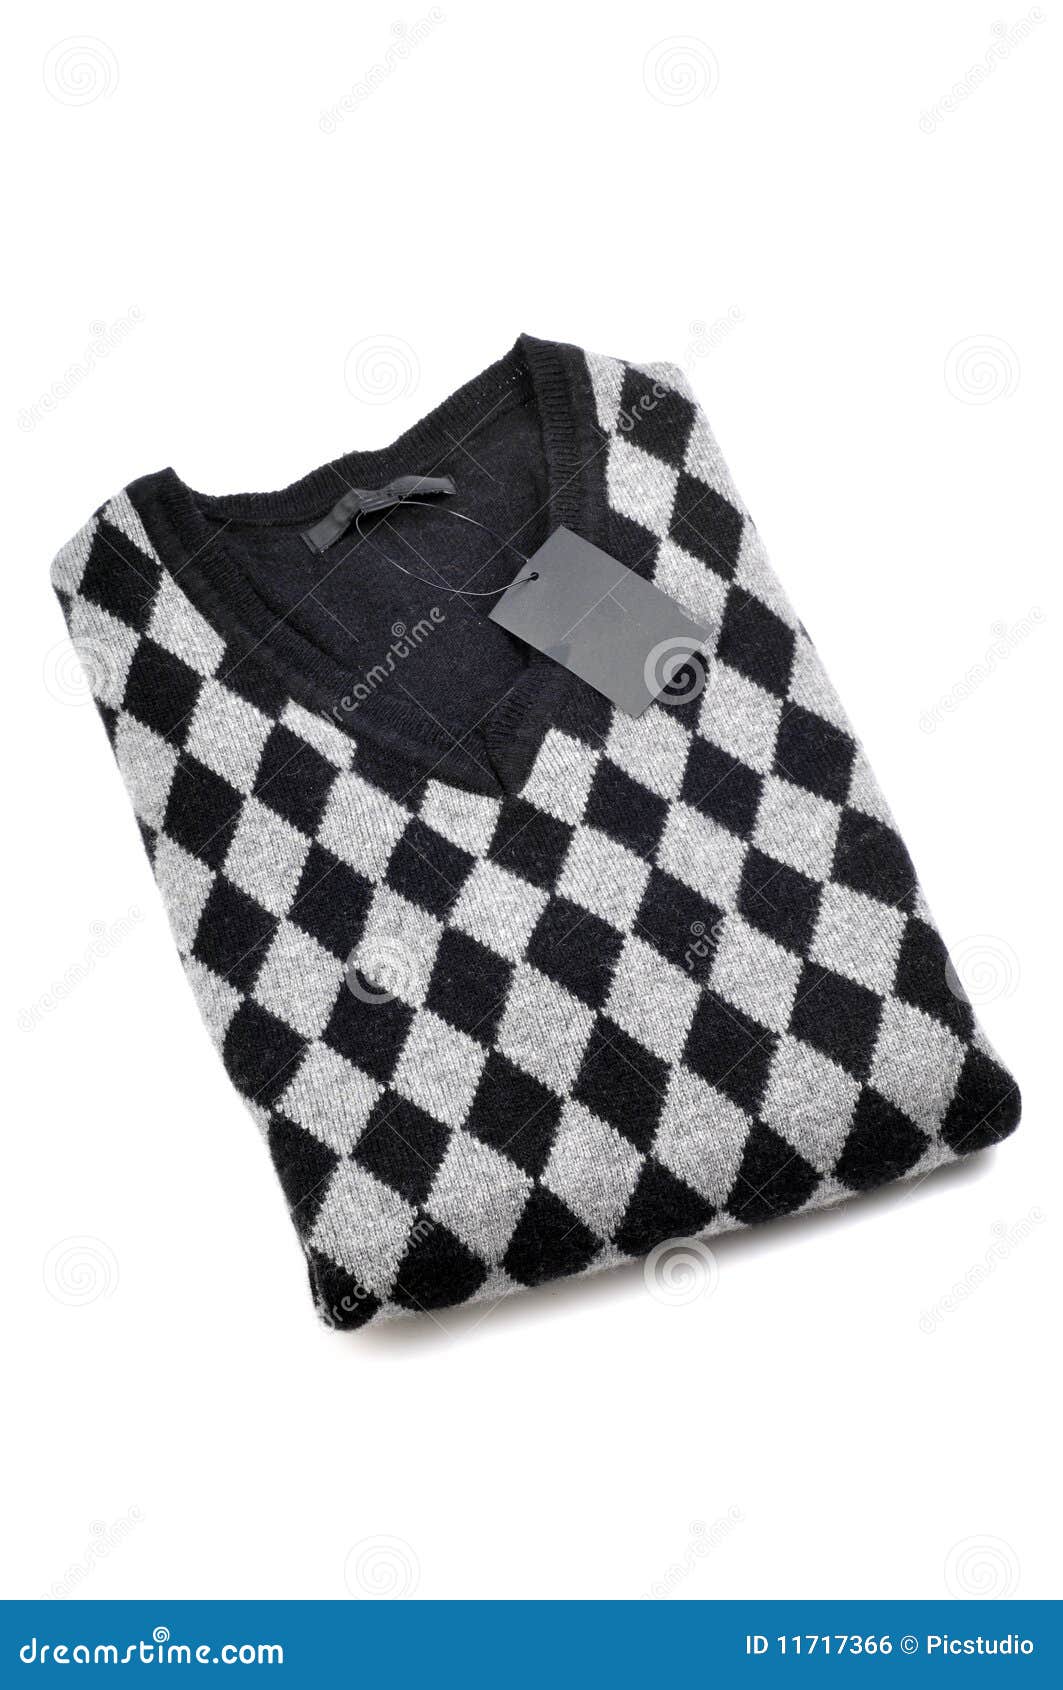 New check sweater stock photo. Image of modern, cotton - 11717366